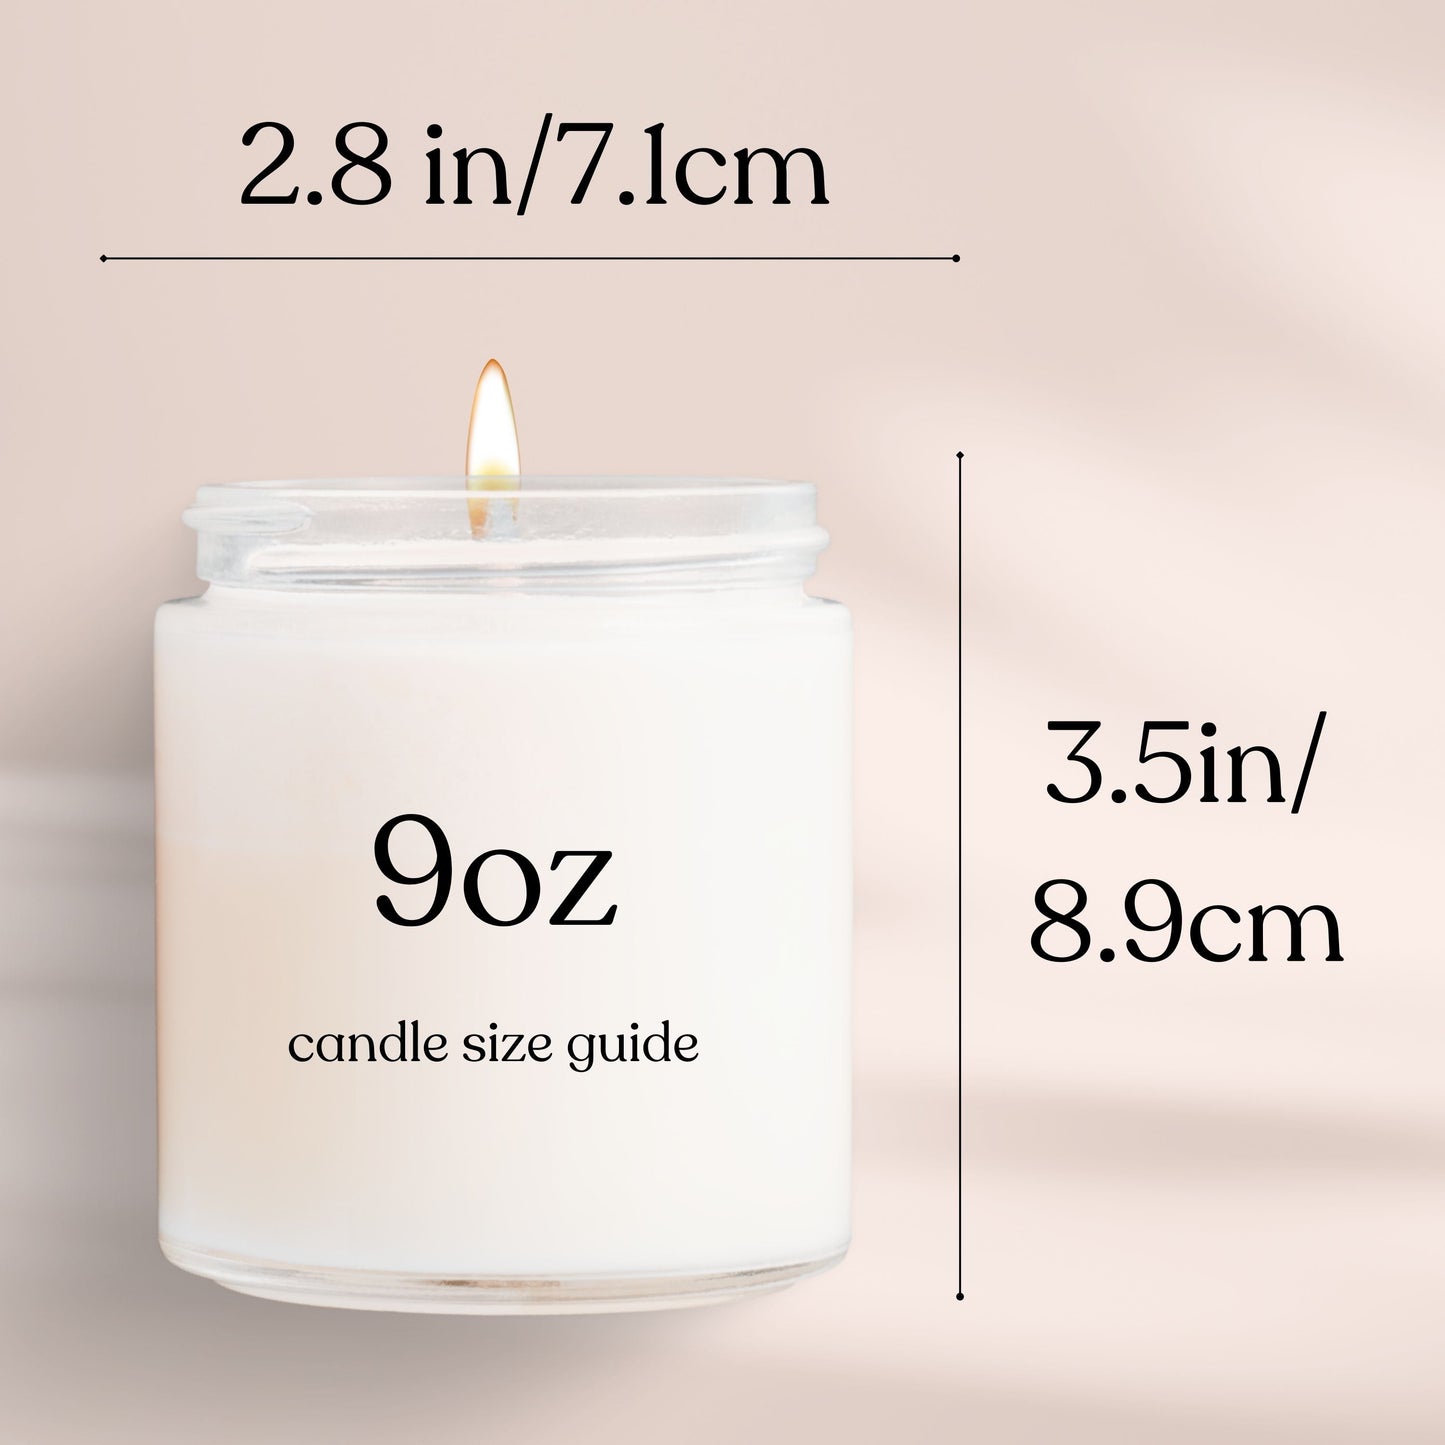 Smells Like "Your Coach Getting Home on Time" 9 oz Candle